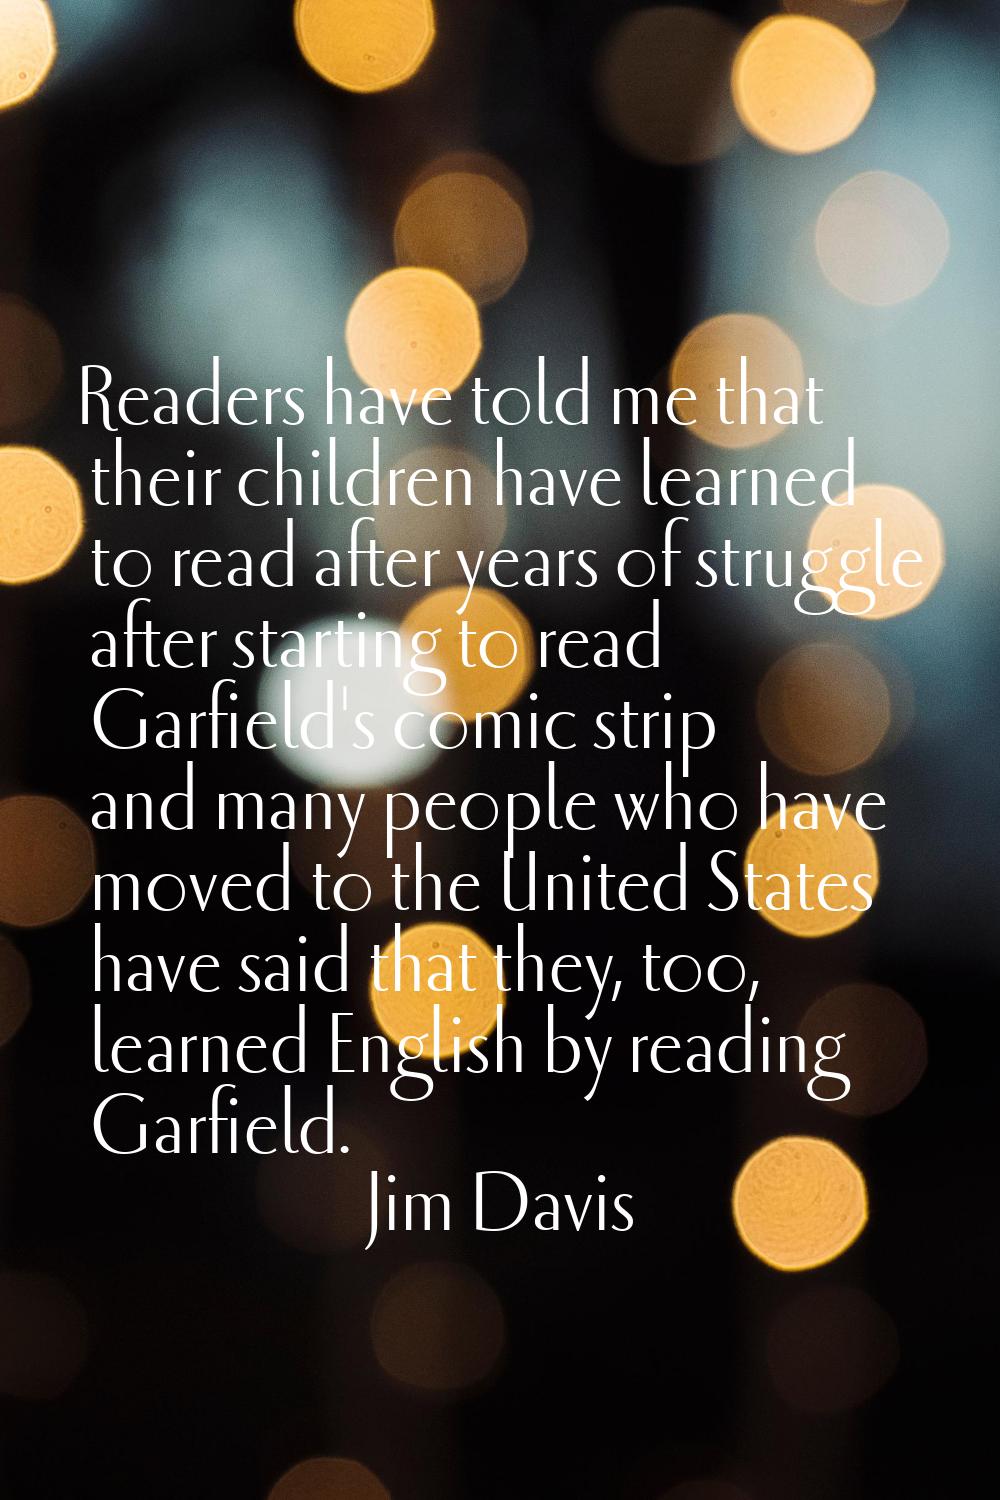 Readers have told me that their children have learned to read after years of struggle after startin